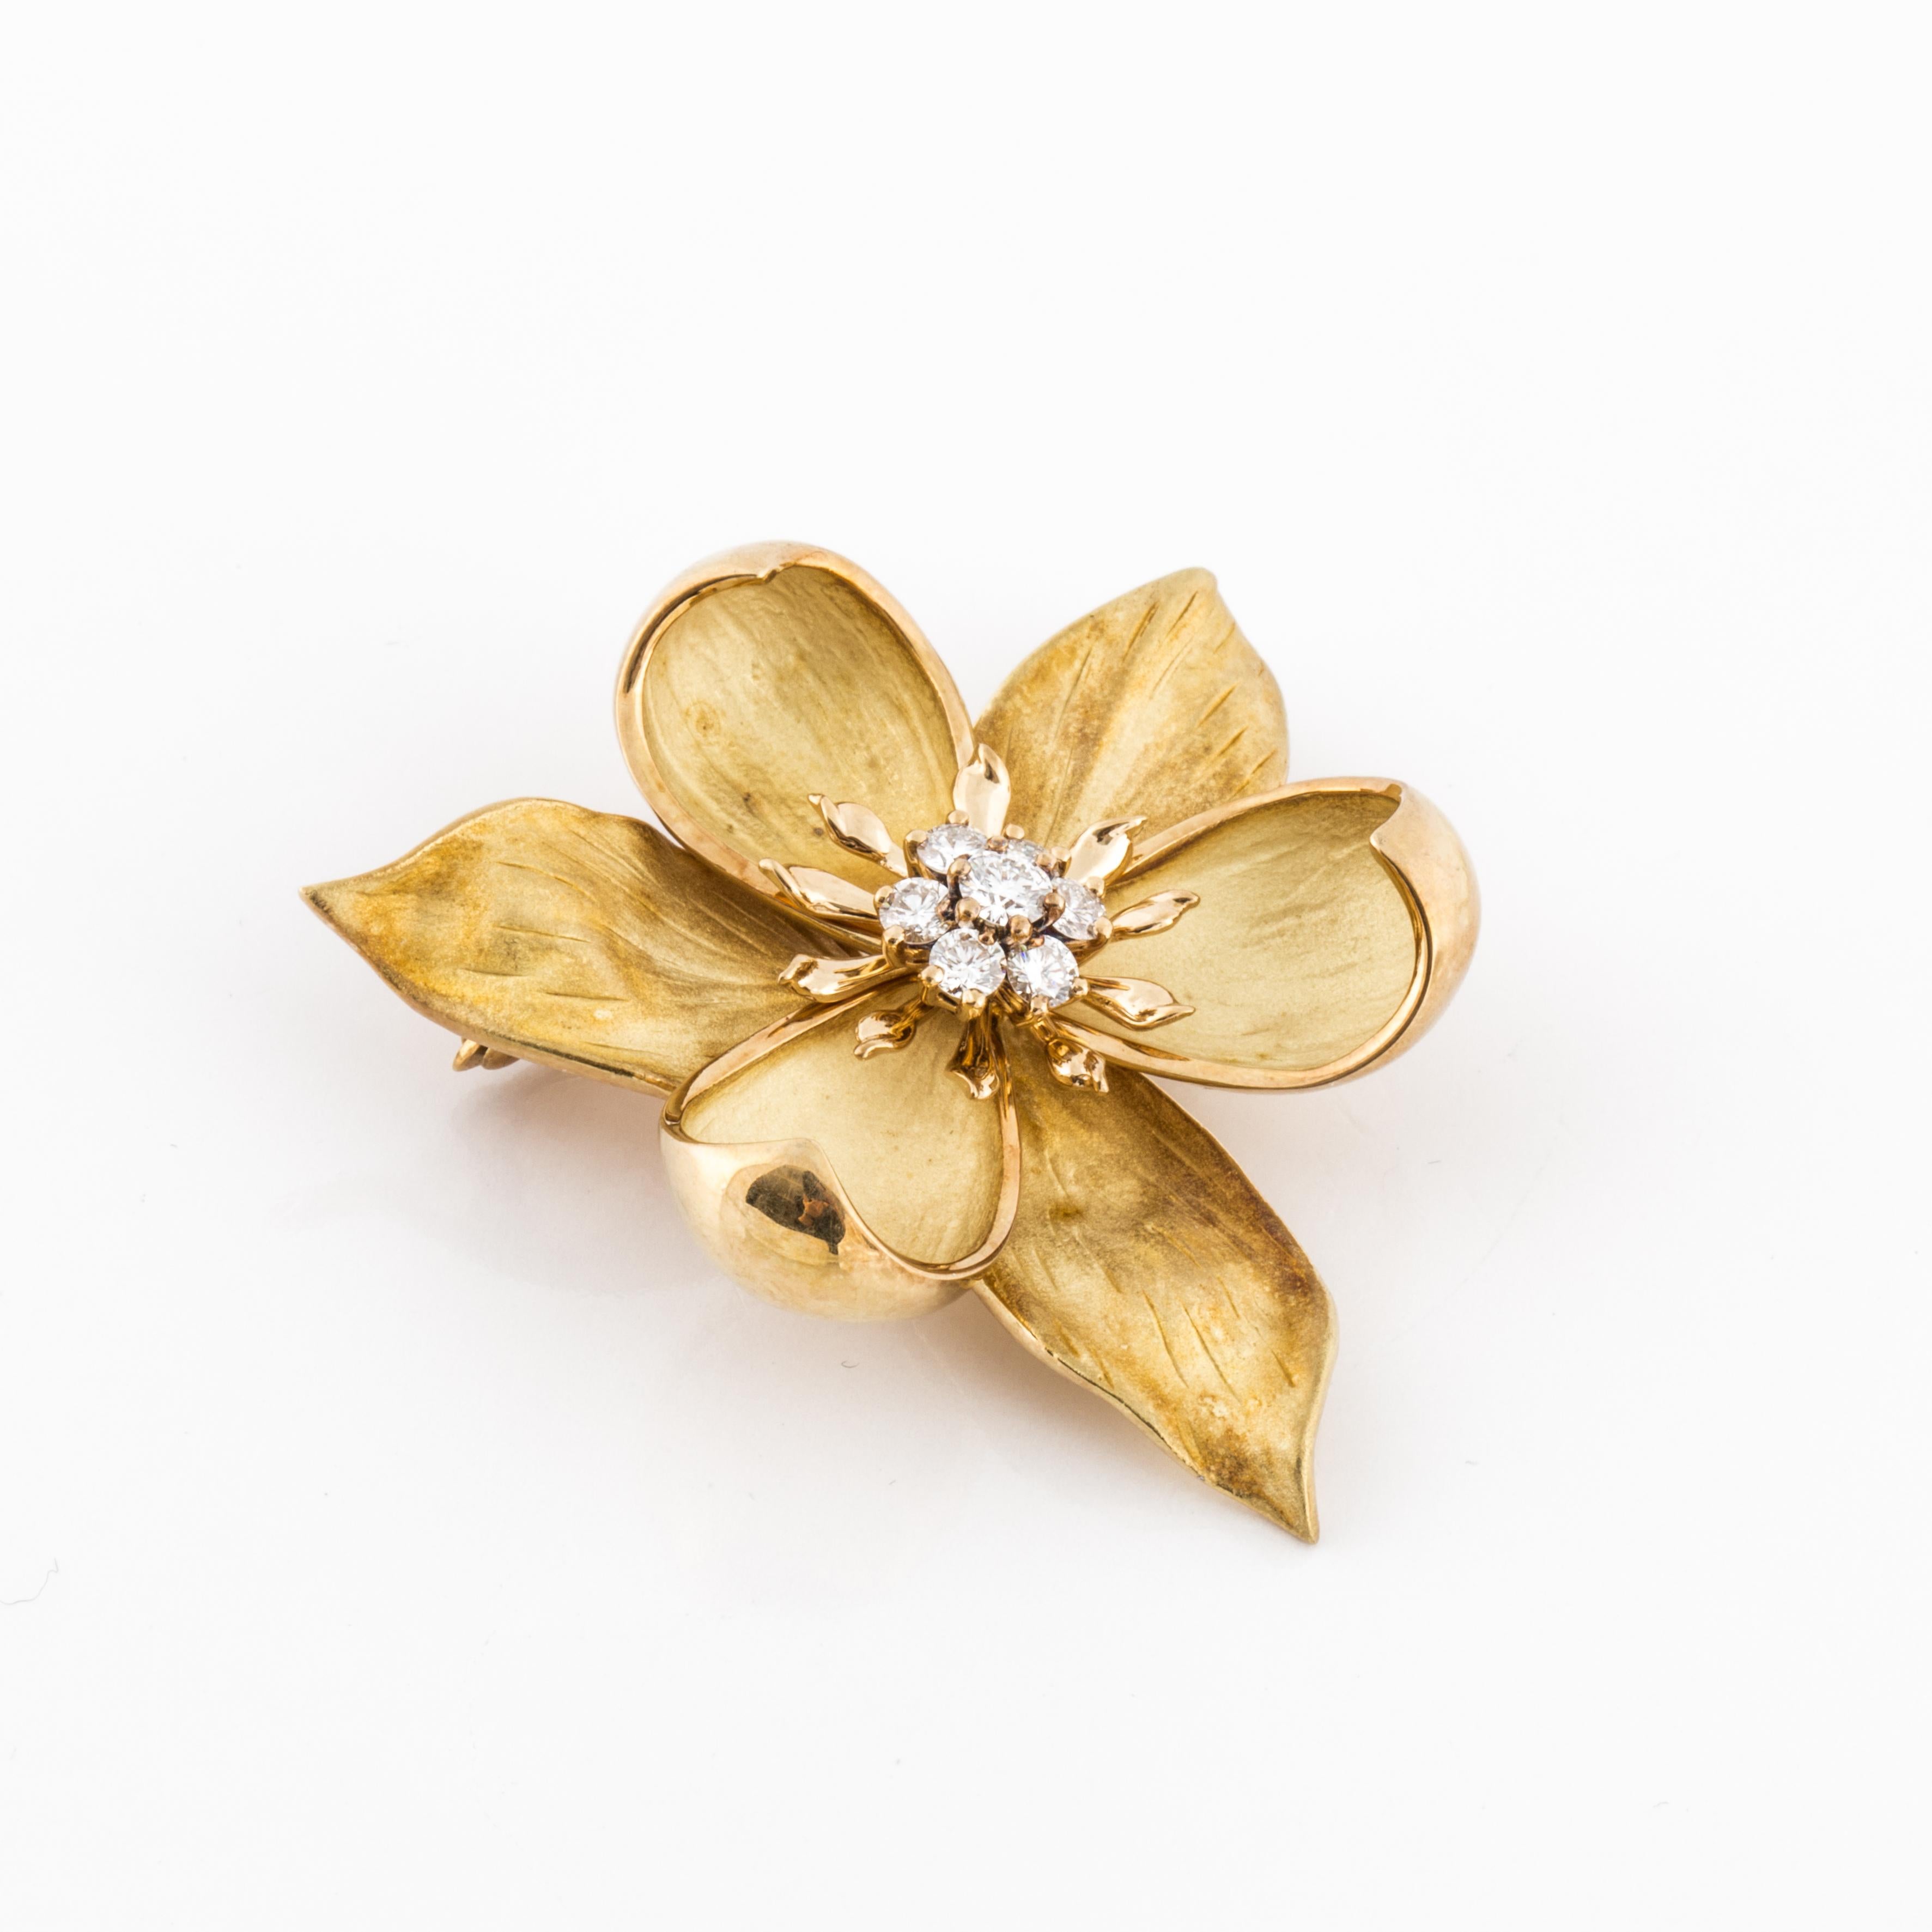 Tiffany & Co. flower pin in 18K yellow gold accented by round diamonds.  There are seven round brilliant-cut diamonds that total 0.70 carats; F-G color and VVS2-VS1 clarity.  It measures 1 3/4 inches long and 1 3/4 inches wide.  